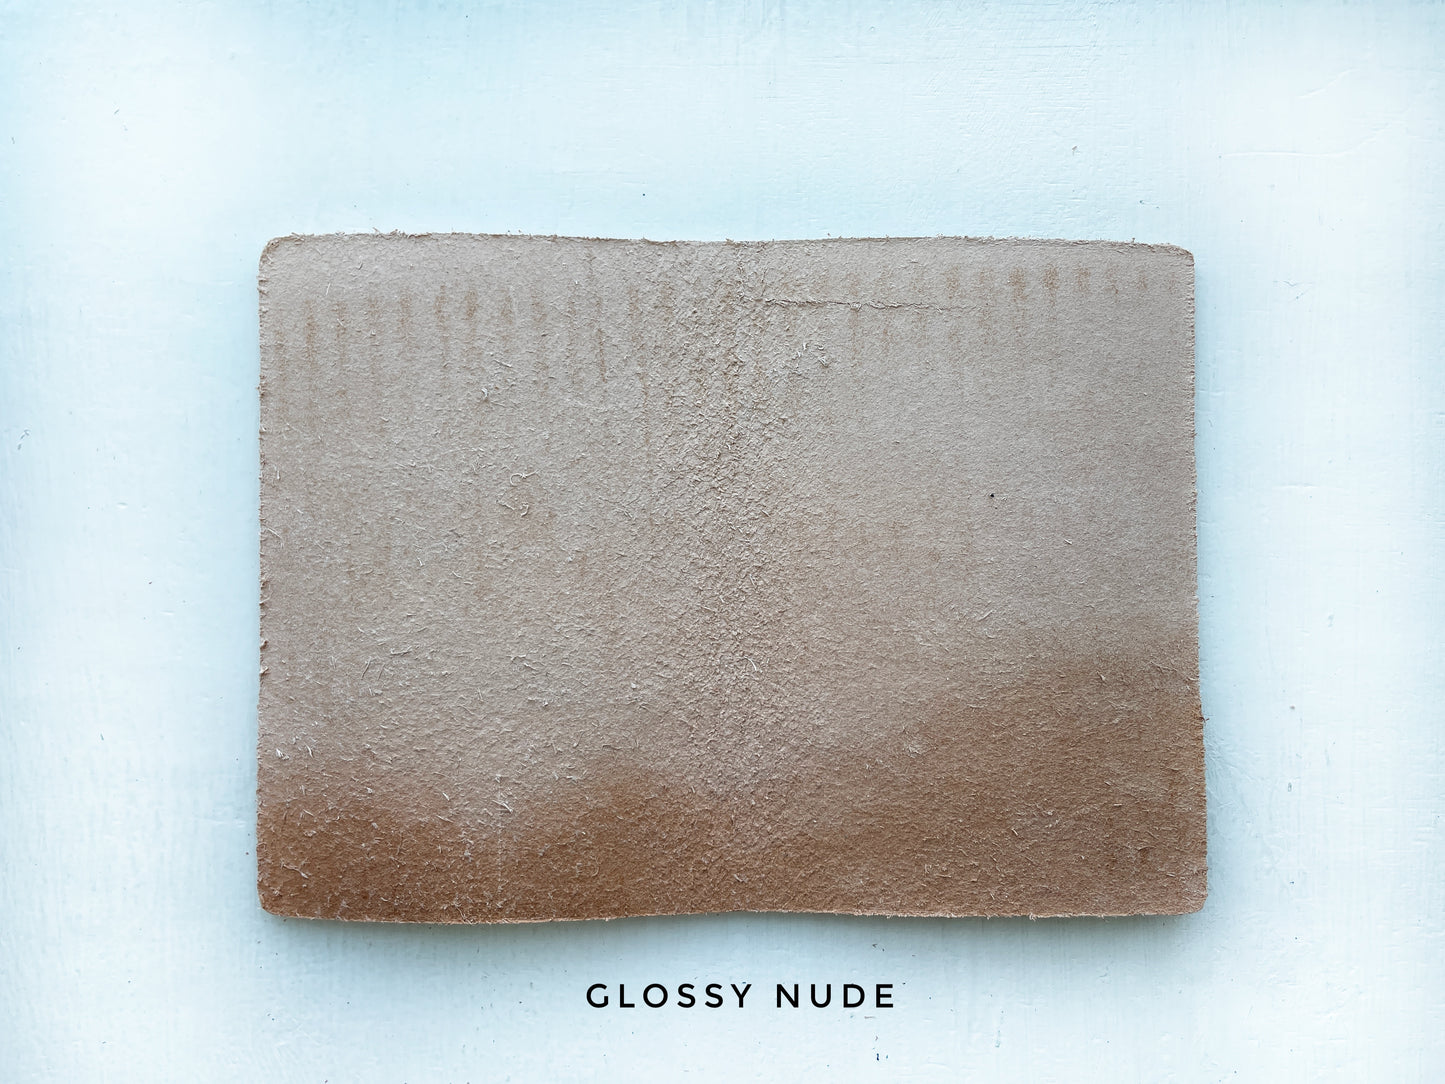 GLOSSY NUDE LEATHER COVER